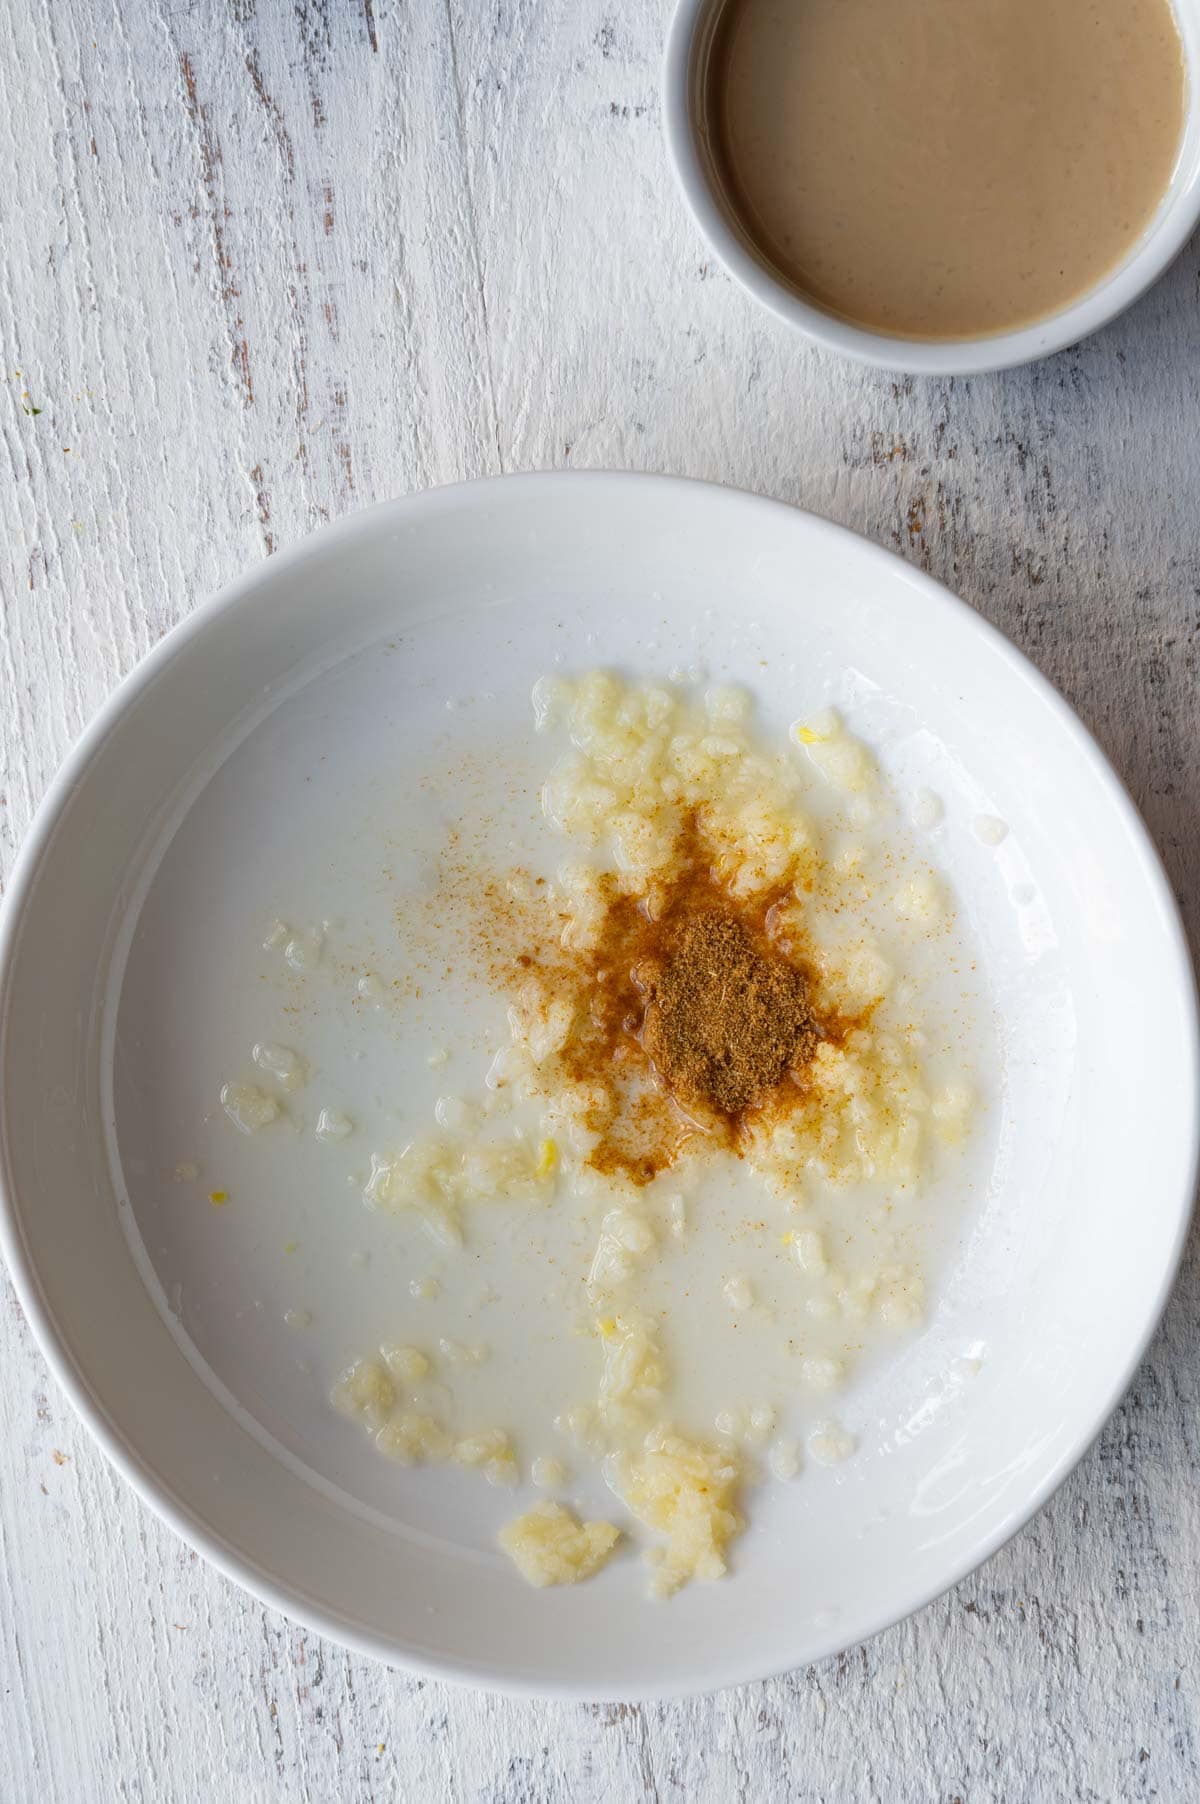 Minced garlic, lemon juice, and ground cumin in a white bowl next to a small white bowl with tahini.